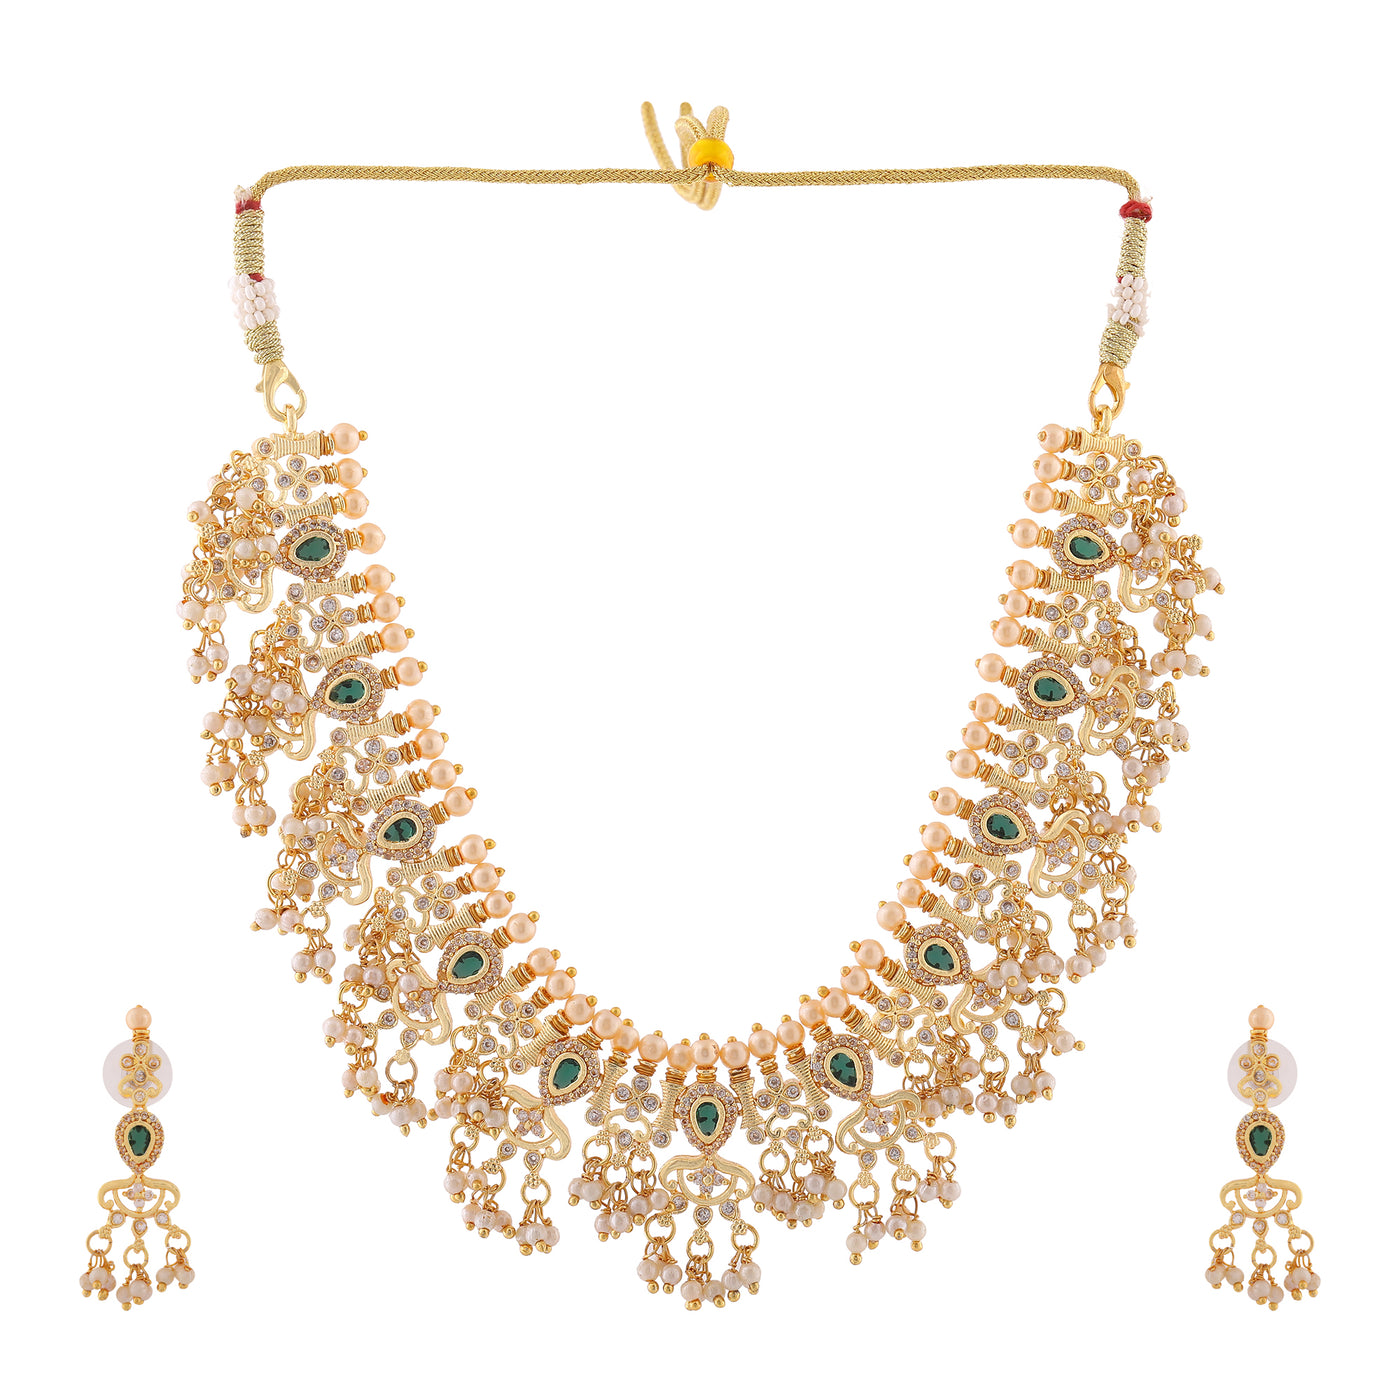 Estele Gold Plated CZ Fascinating Necklace Set with Pearls for Women